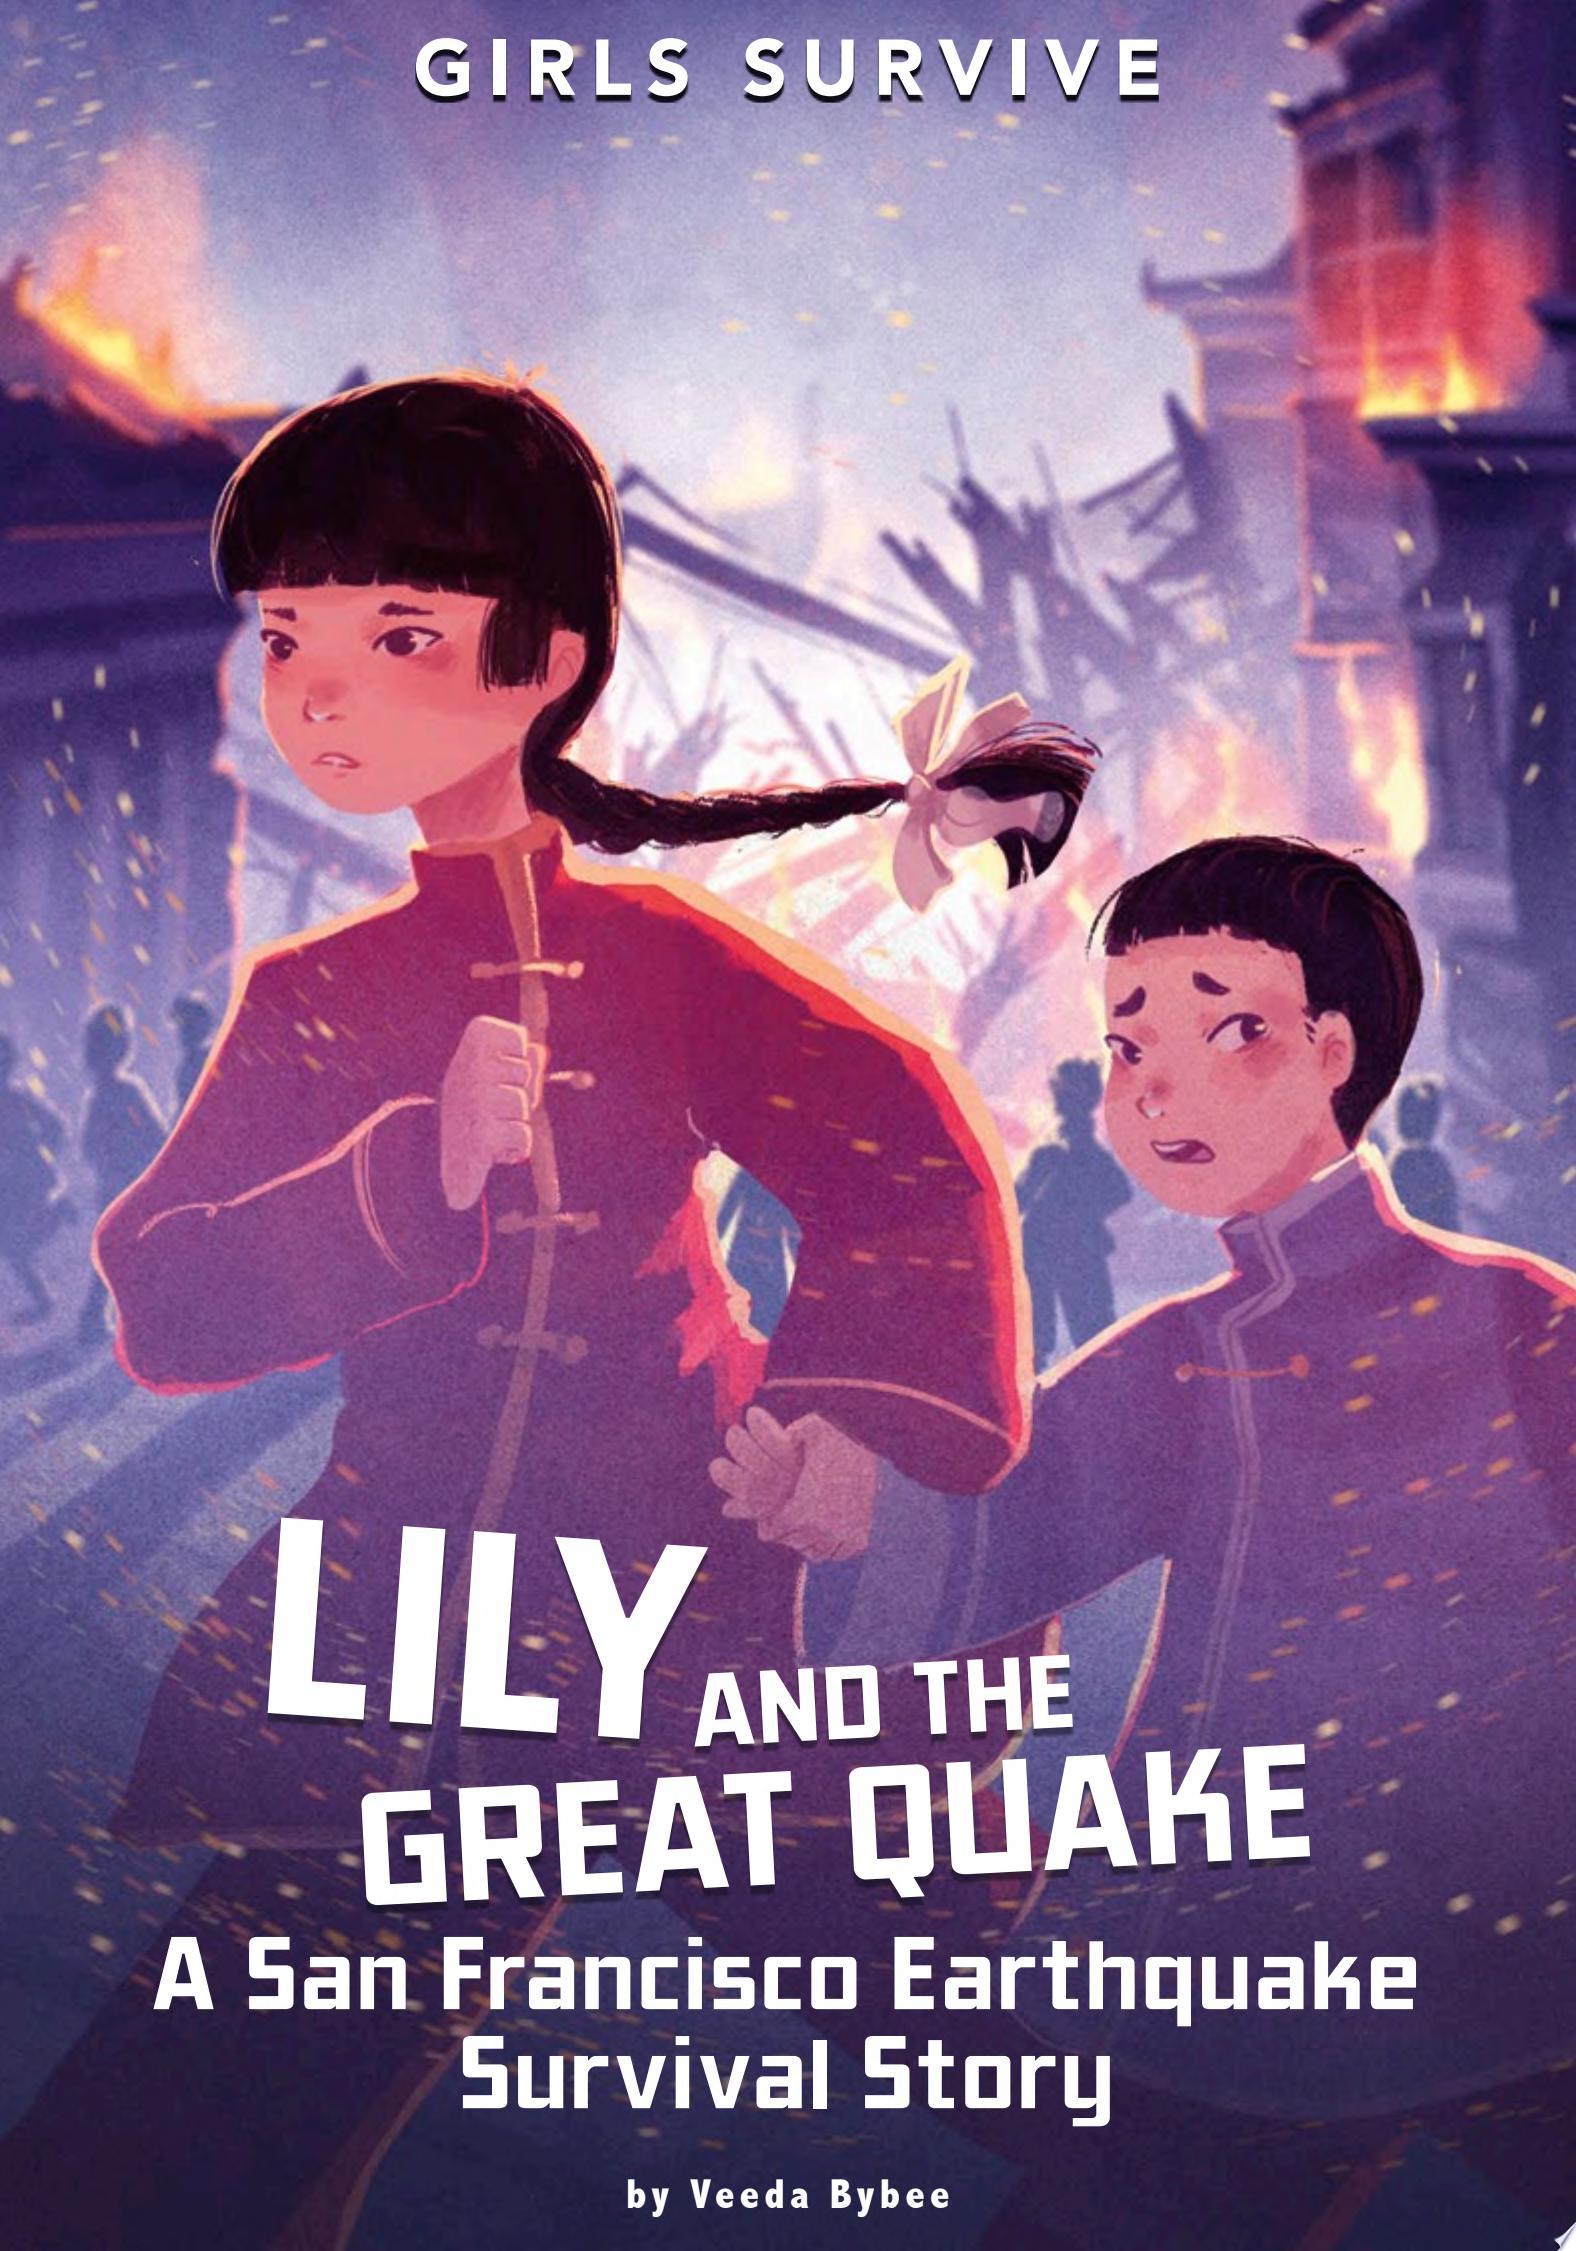 Image for "Lily and the Great Quake"